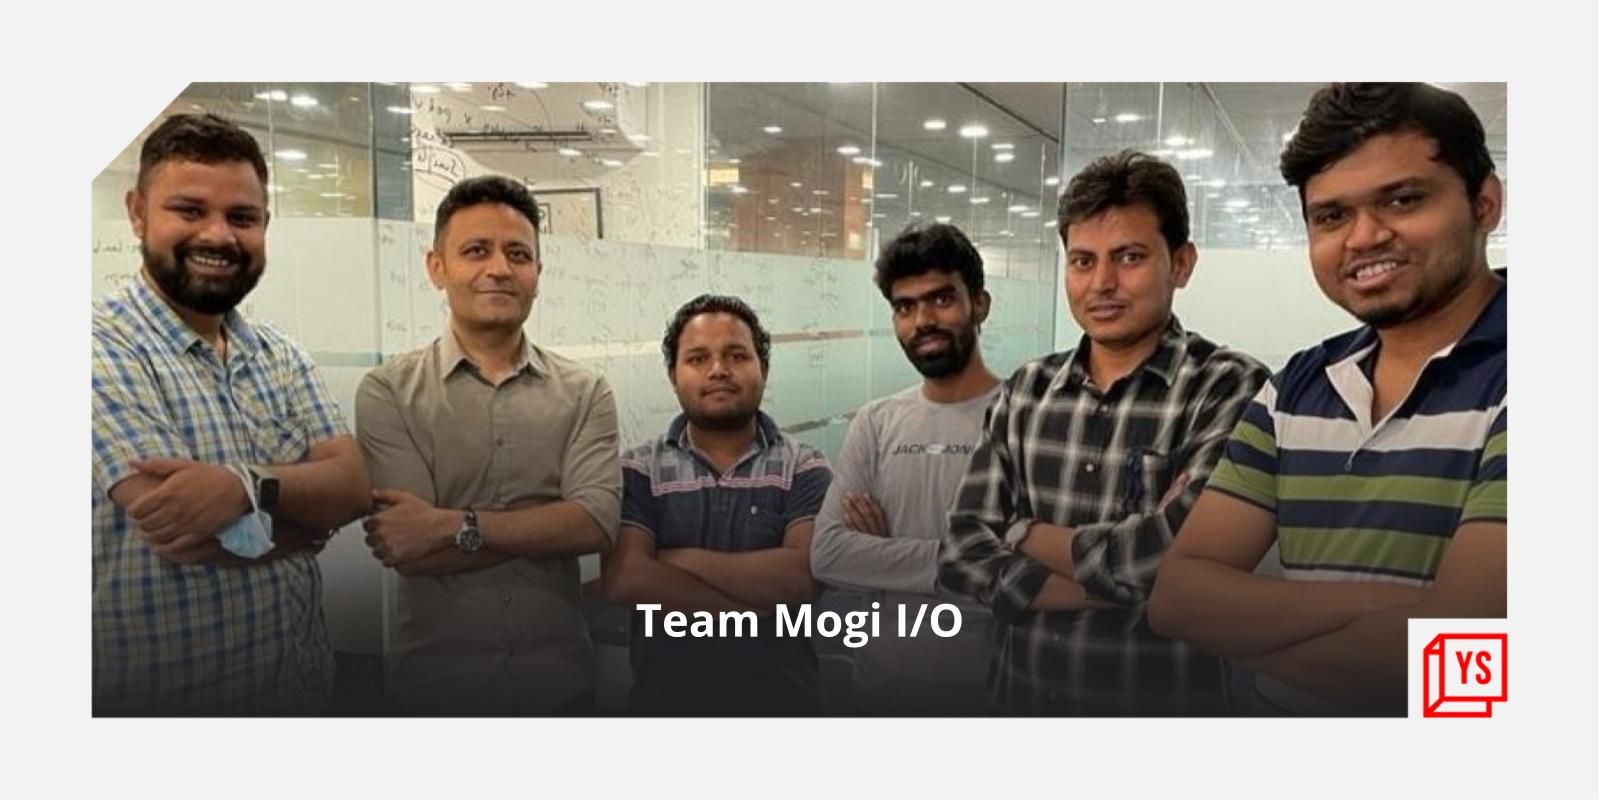 [Tech50] From Yoga teacher to film makers, video tech startup Mogi I/O aims to help users launch their own OTT app in 24 hours 
